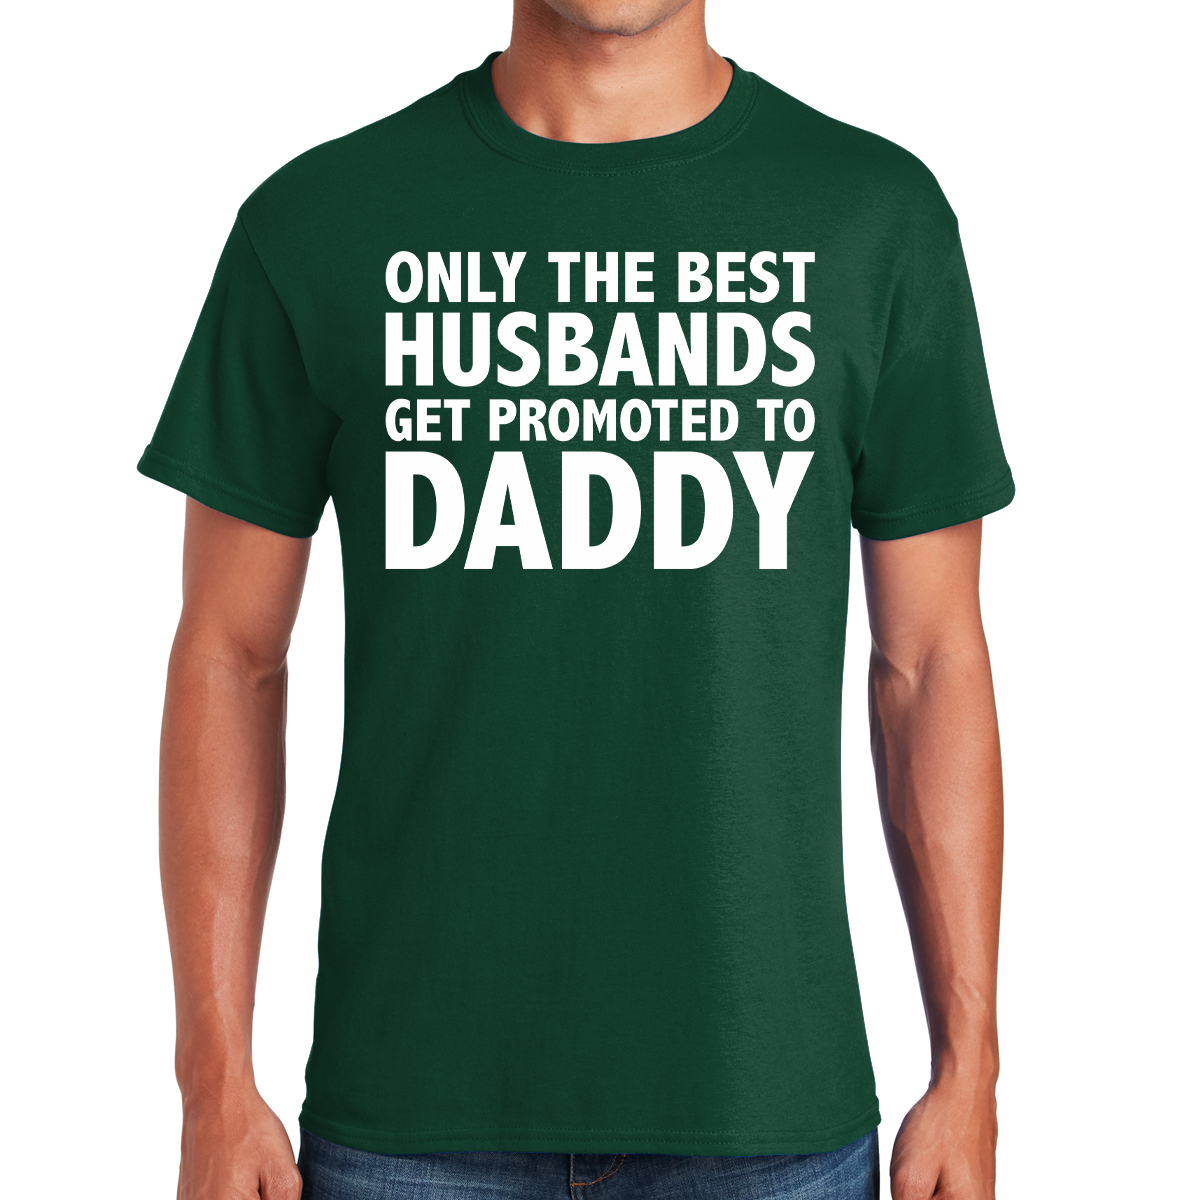 Only The Best Husbands Get Promoted To Daddy Celebrating Fatherhood Awesome Dad T-shirt